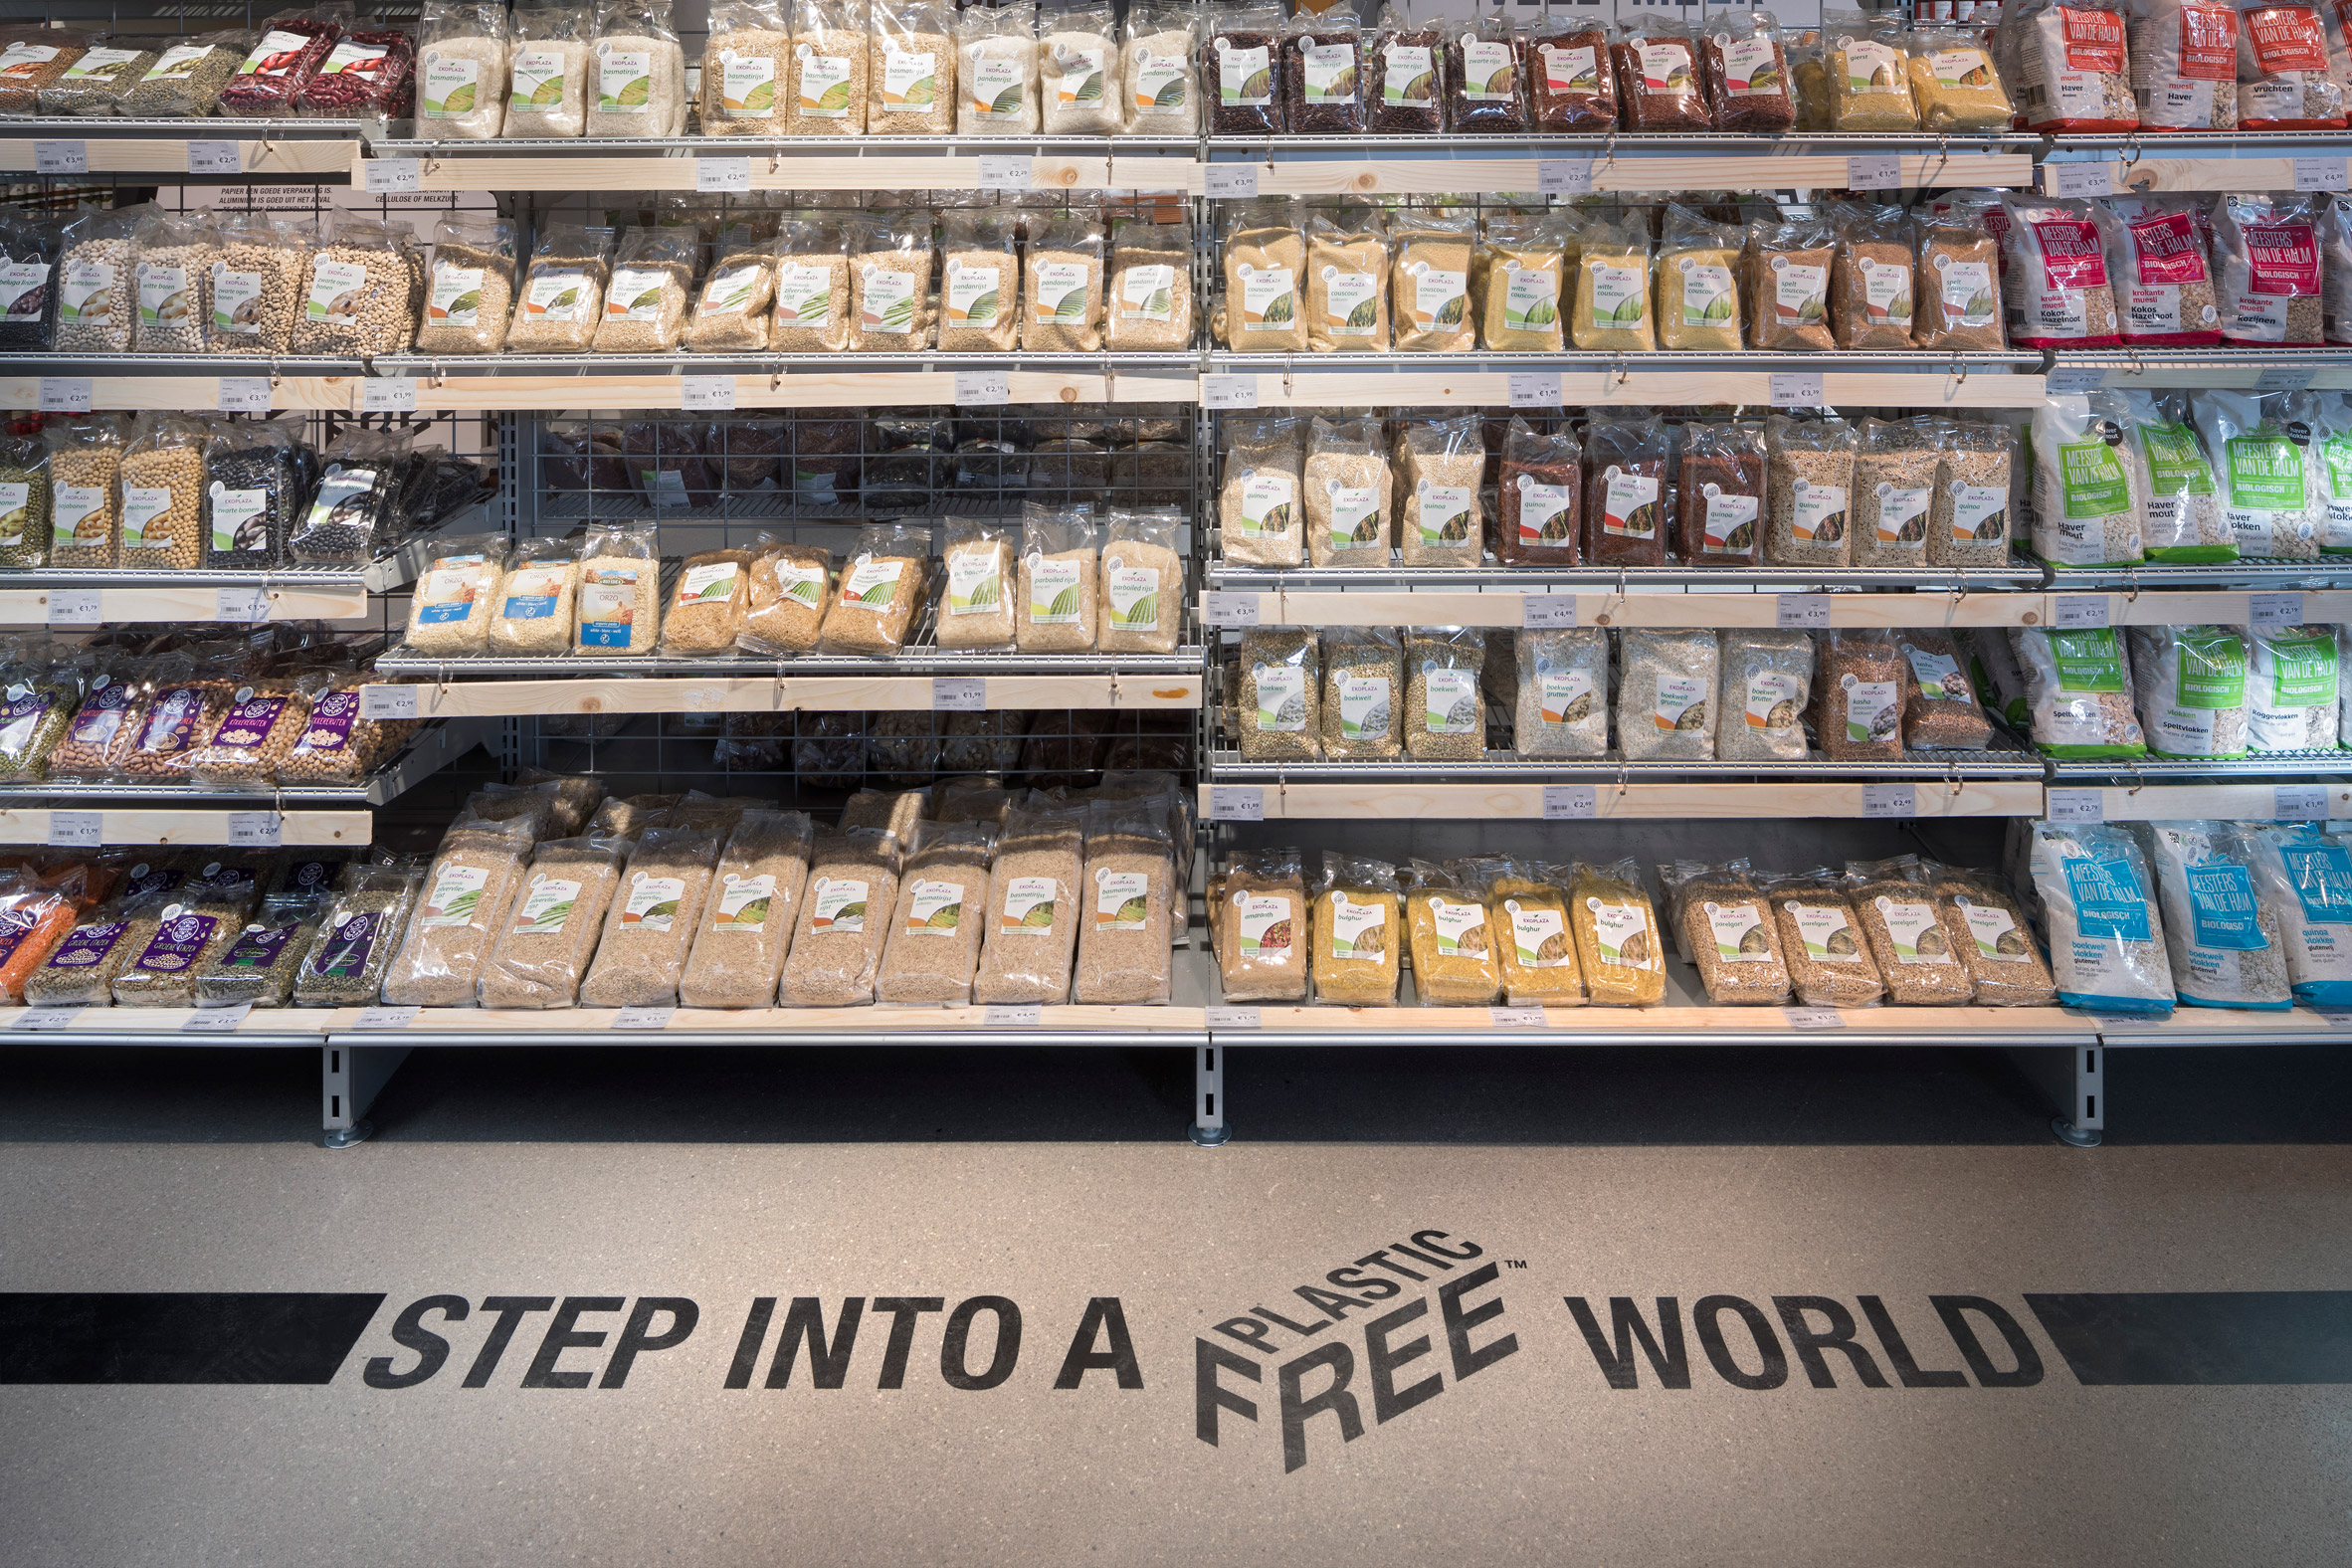 Made Thought creates bold branding for world's first plastic-free supermarket aisle